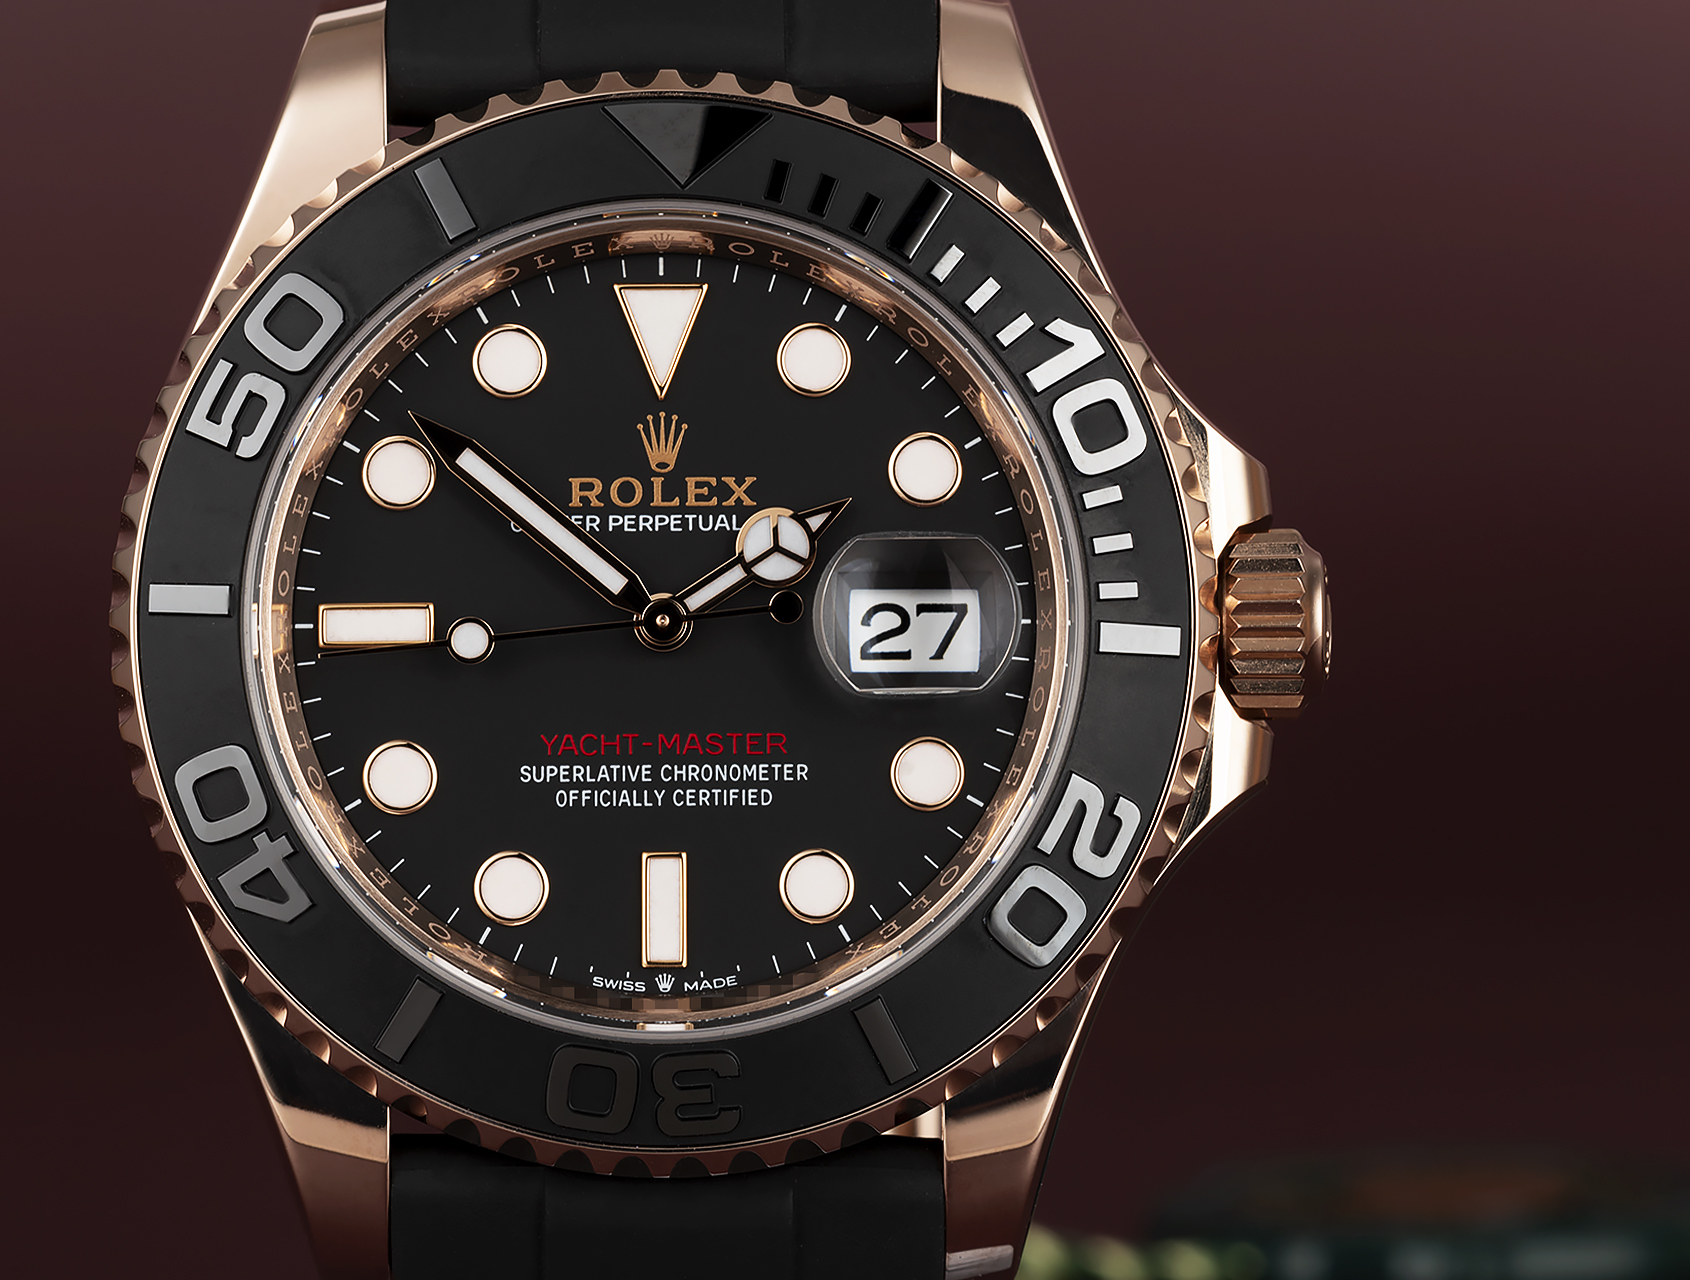 Rolex Yacht-Master Watches | ref 126655 | 126655 - Latest Model | The ...